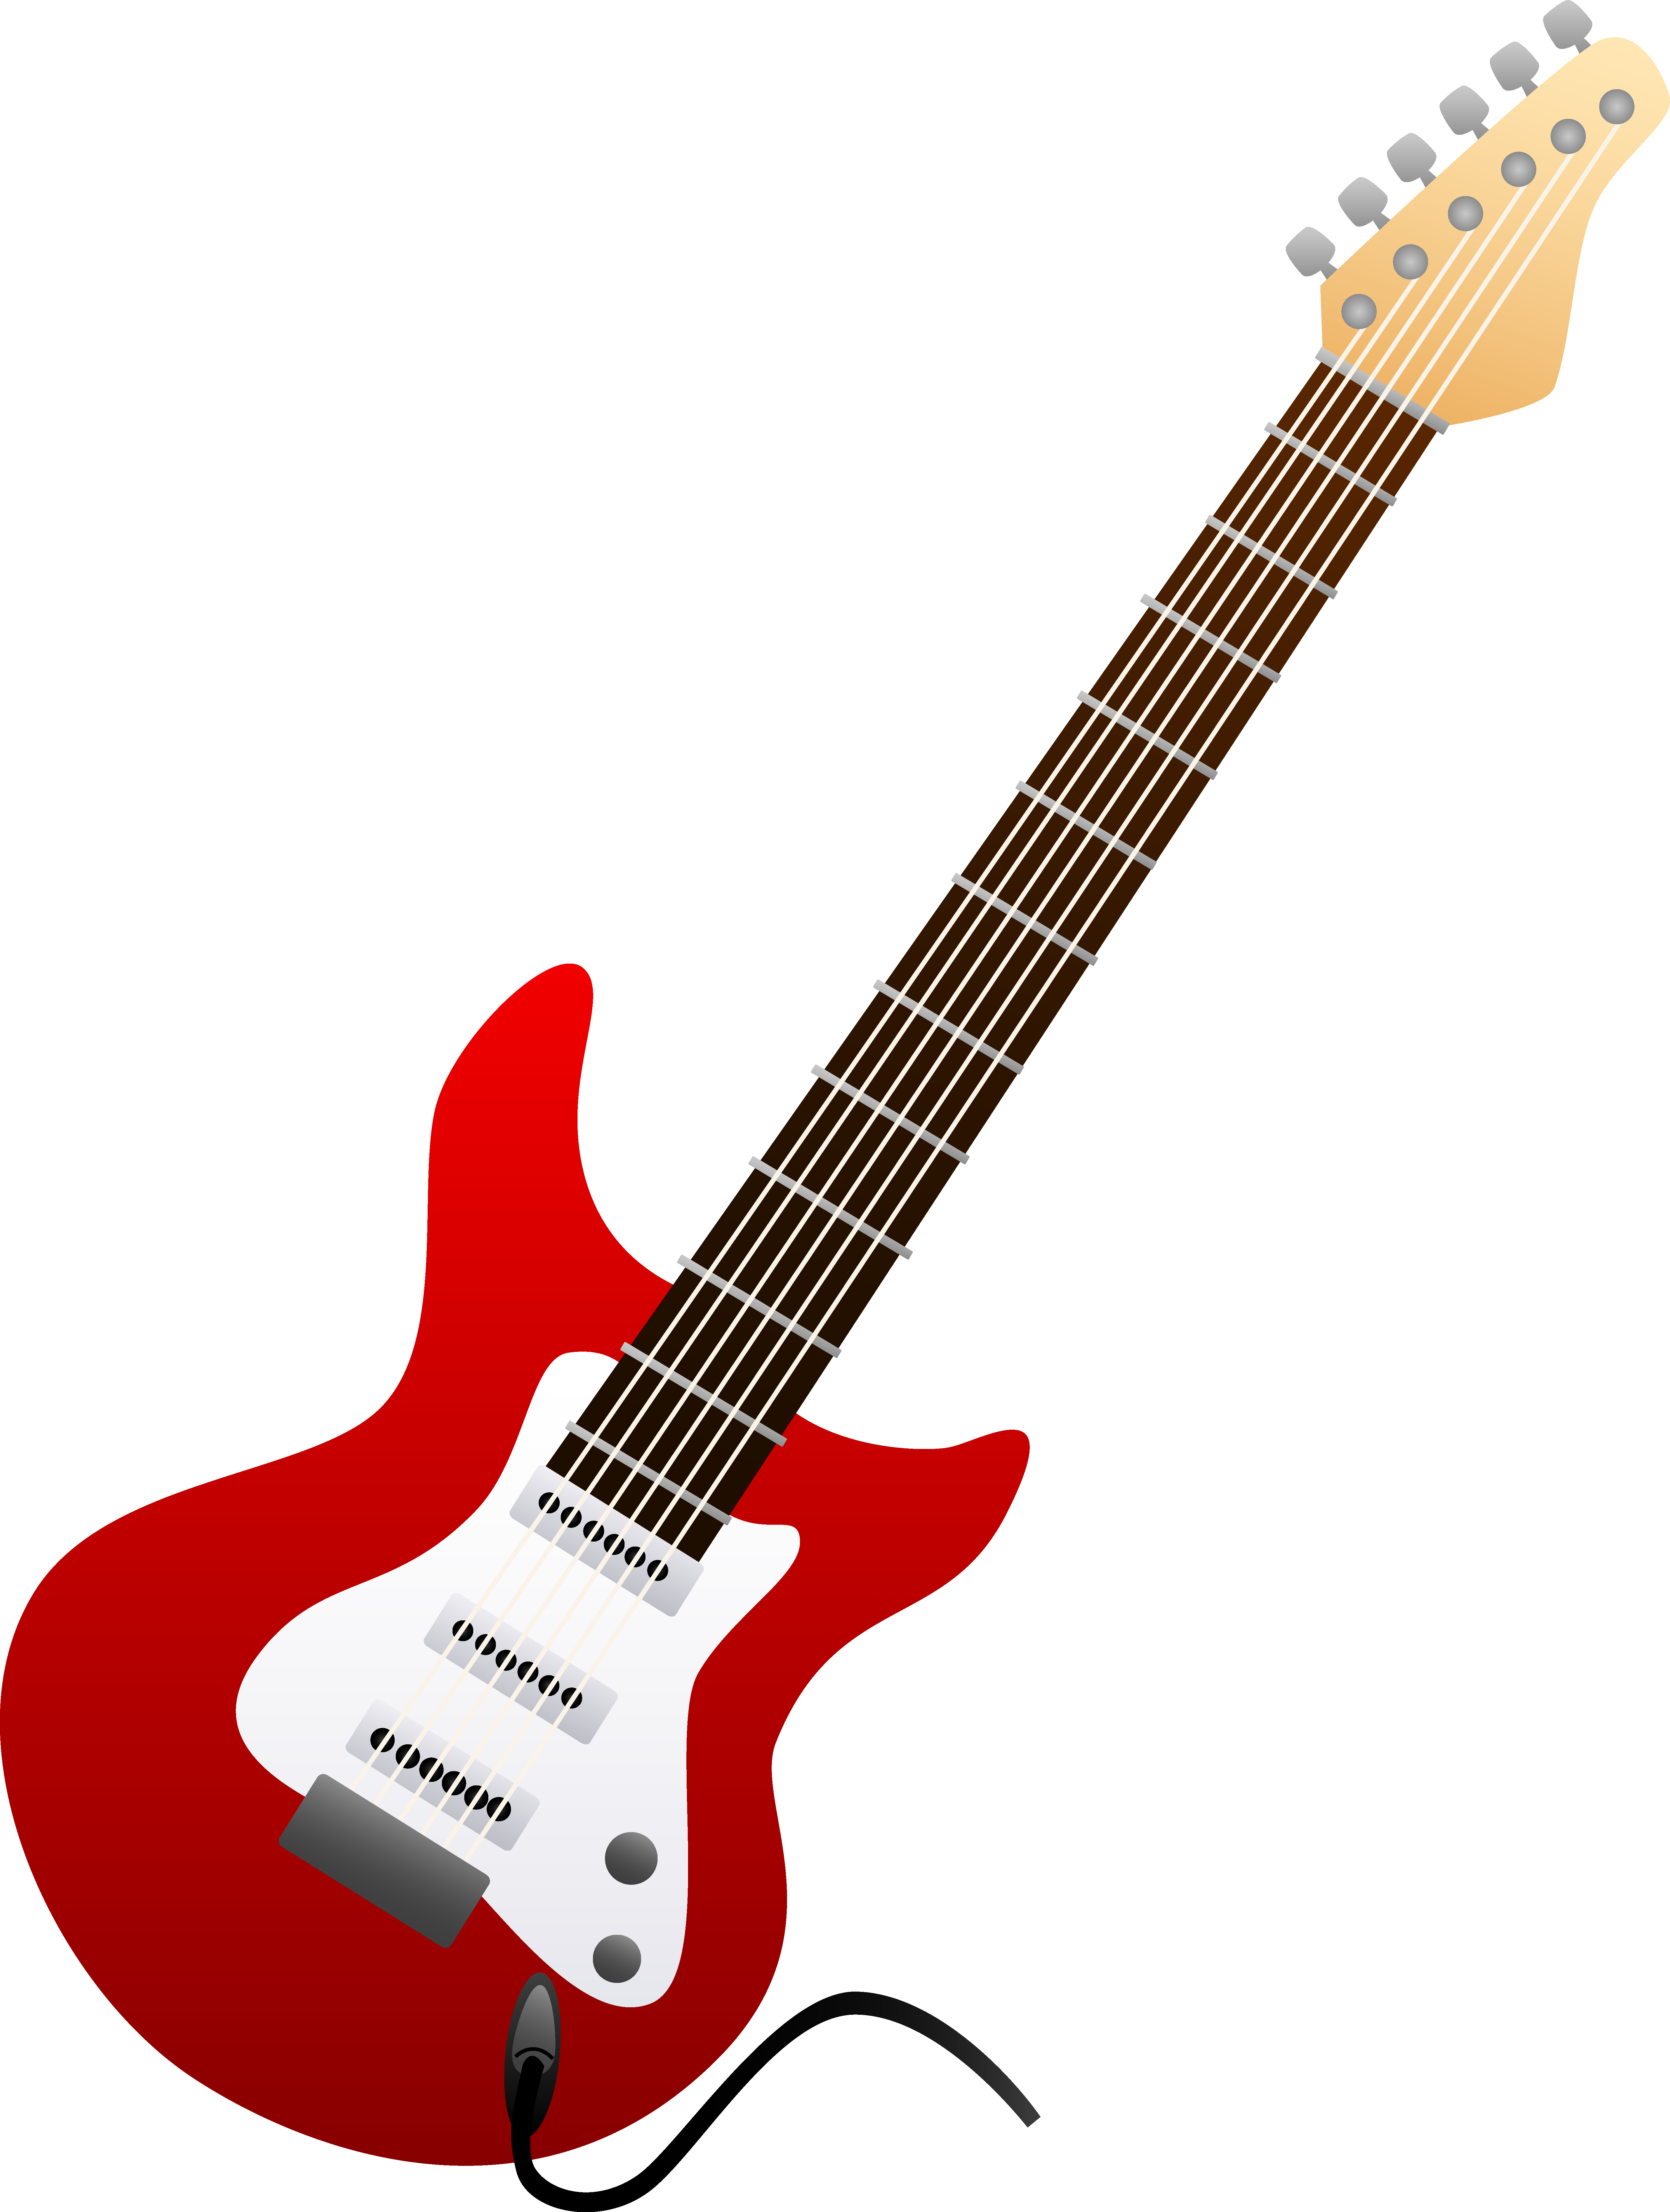 Red Electric Guitar Design Free Clip Art - HD Wallpapers